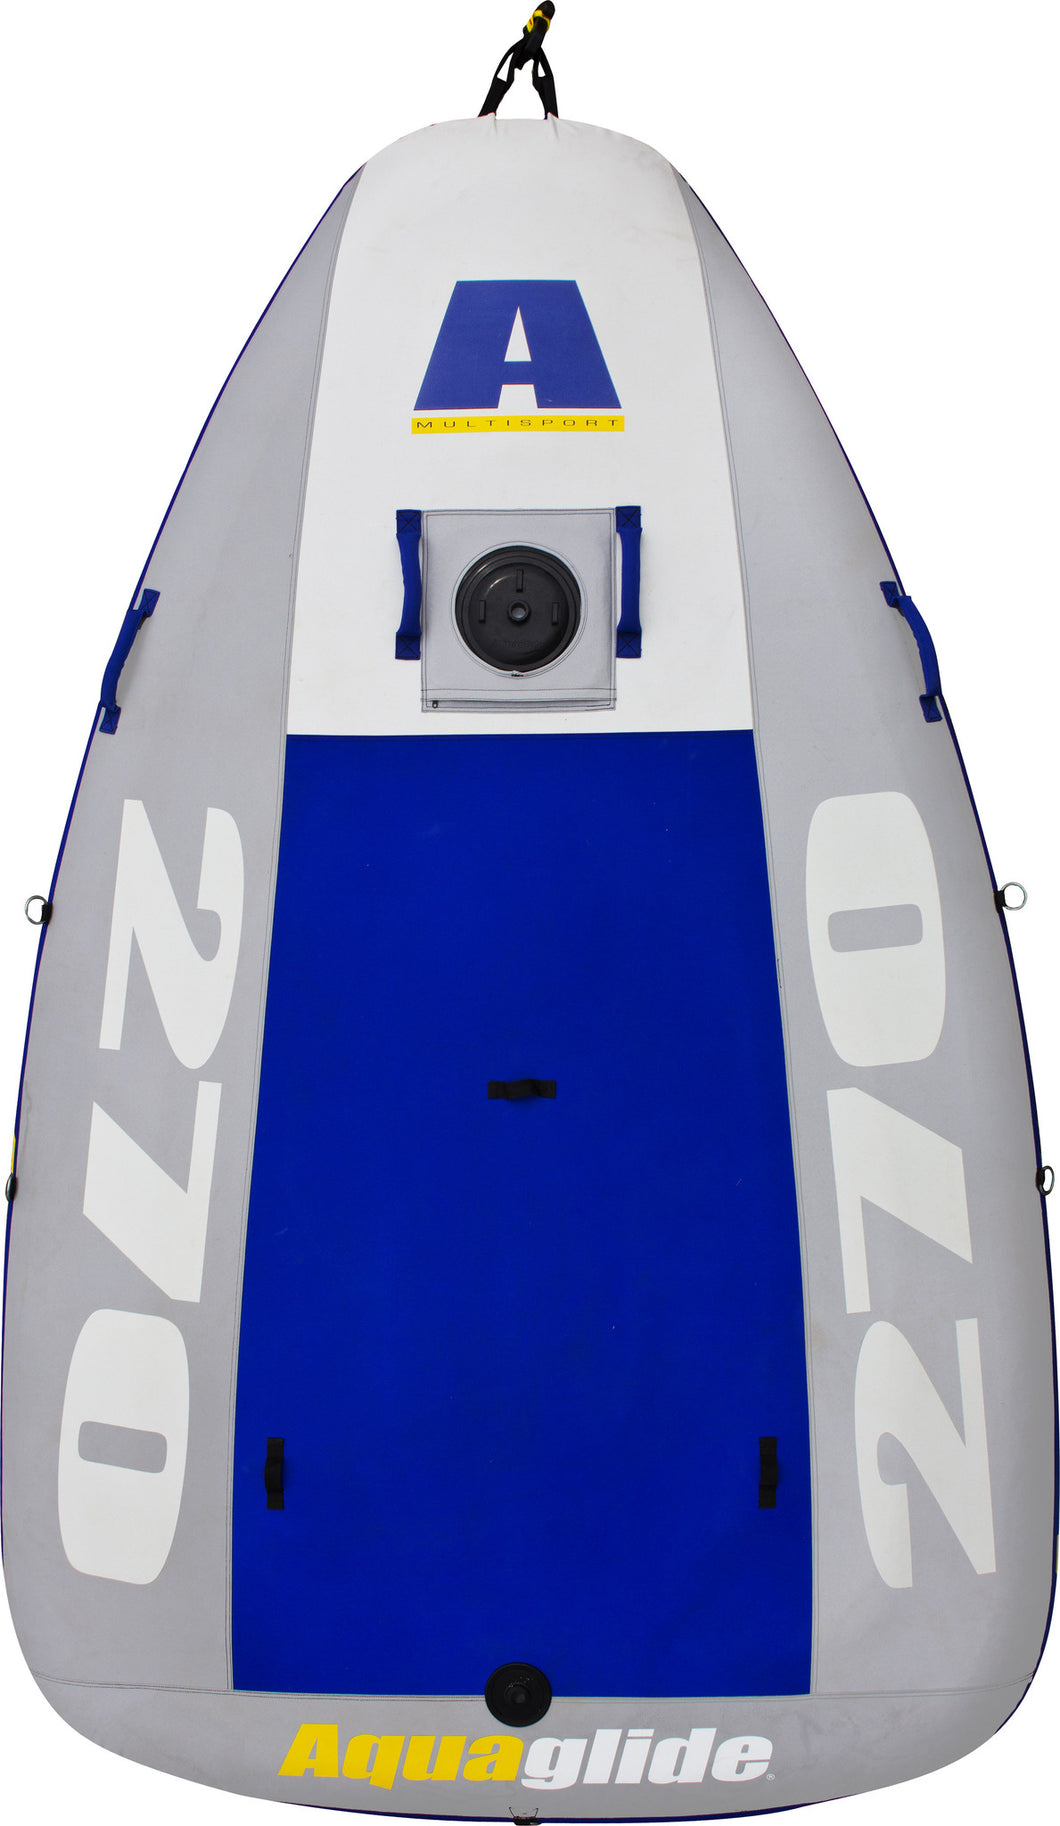 Aquaglide Multisport 270 Inflatable Sailboat Hull Only - River To Ocean Adventures